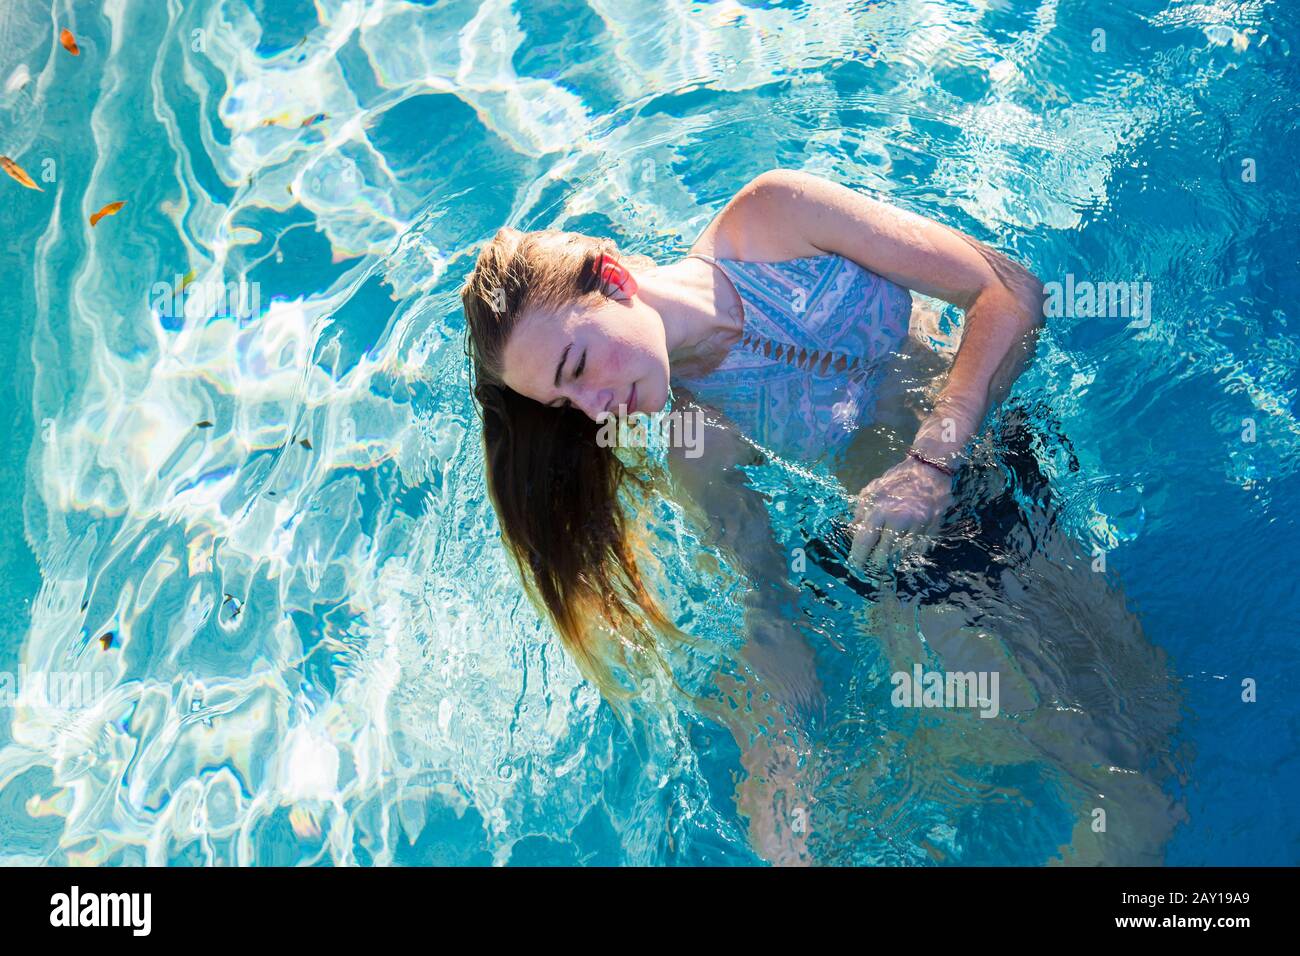 A teenage girl swimming in a pool, head back hair floating in the water. Stock Photo